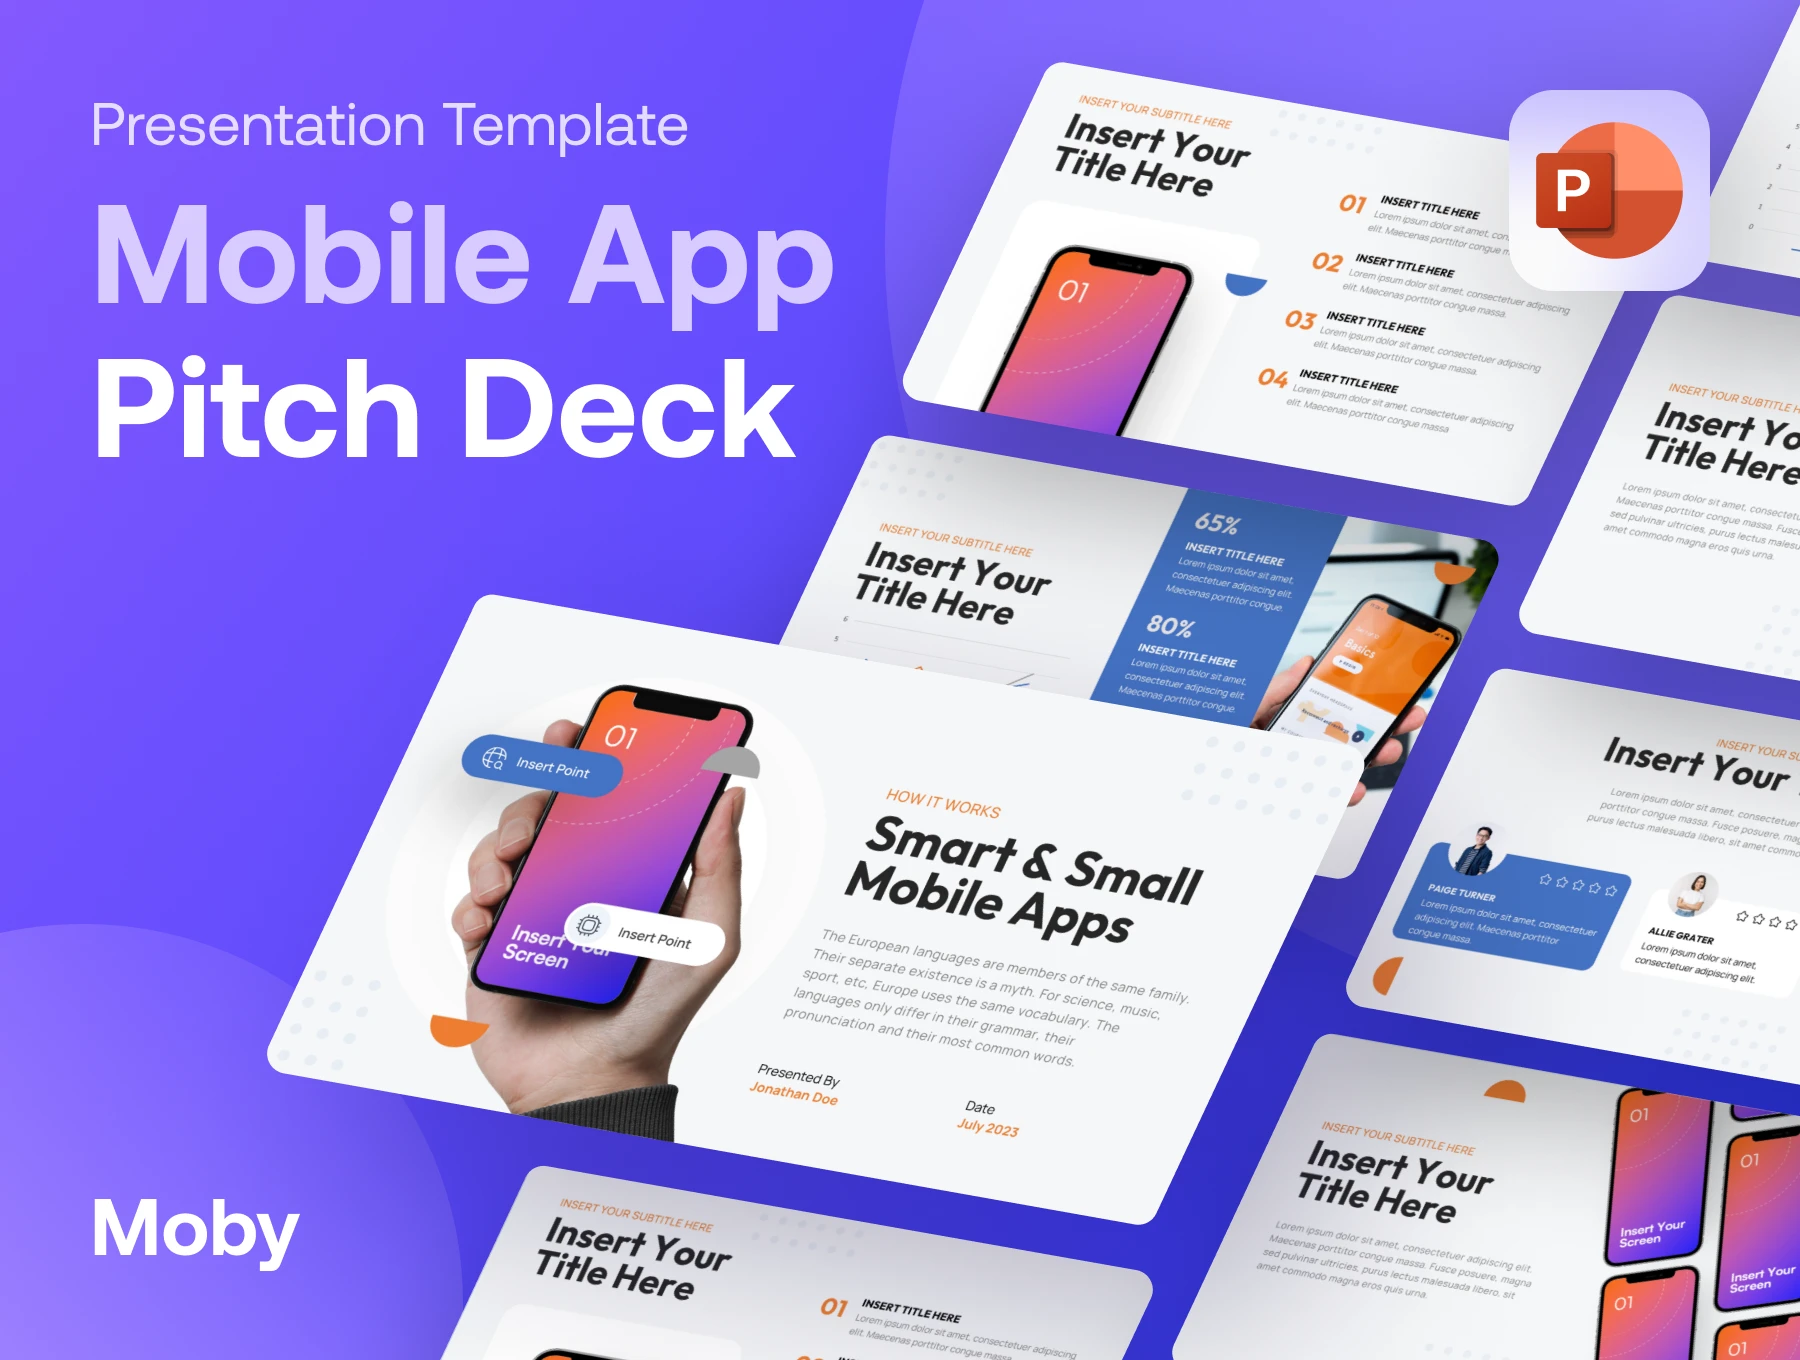 Moby - Mobile App PowerPoint Presentation Template
